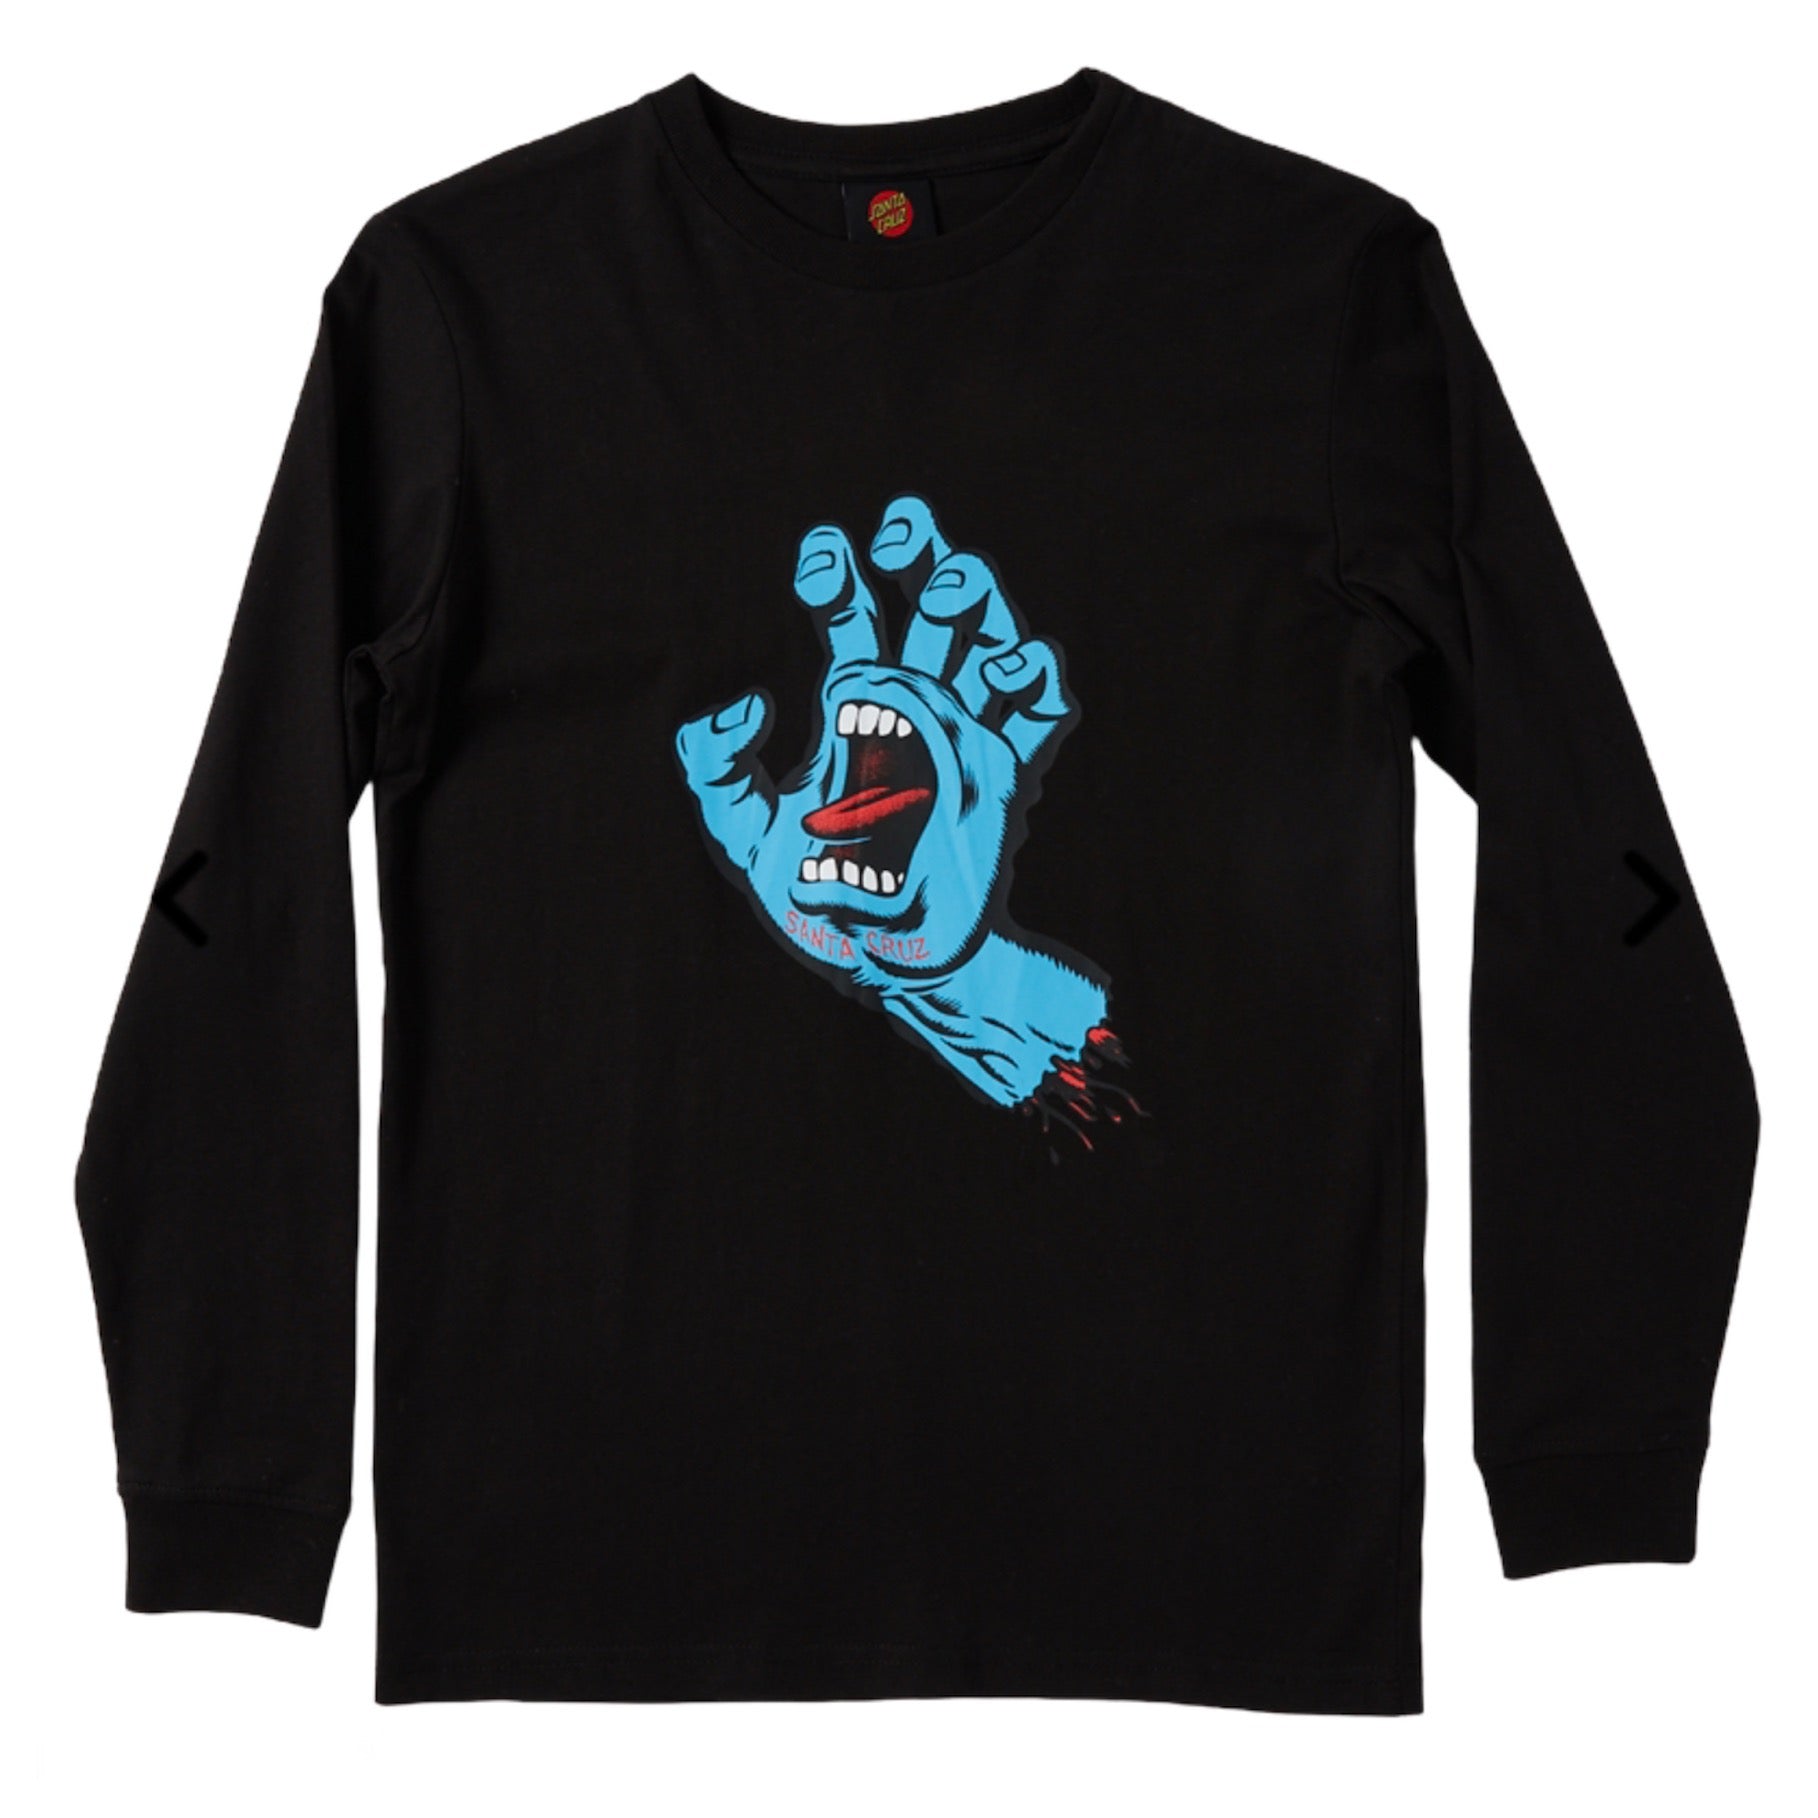 Screaming hand front print youth L/S tee